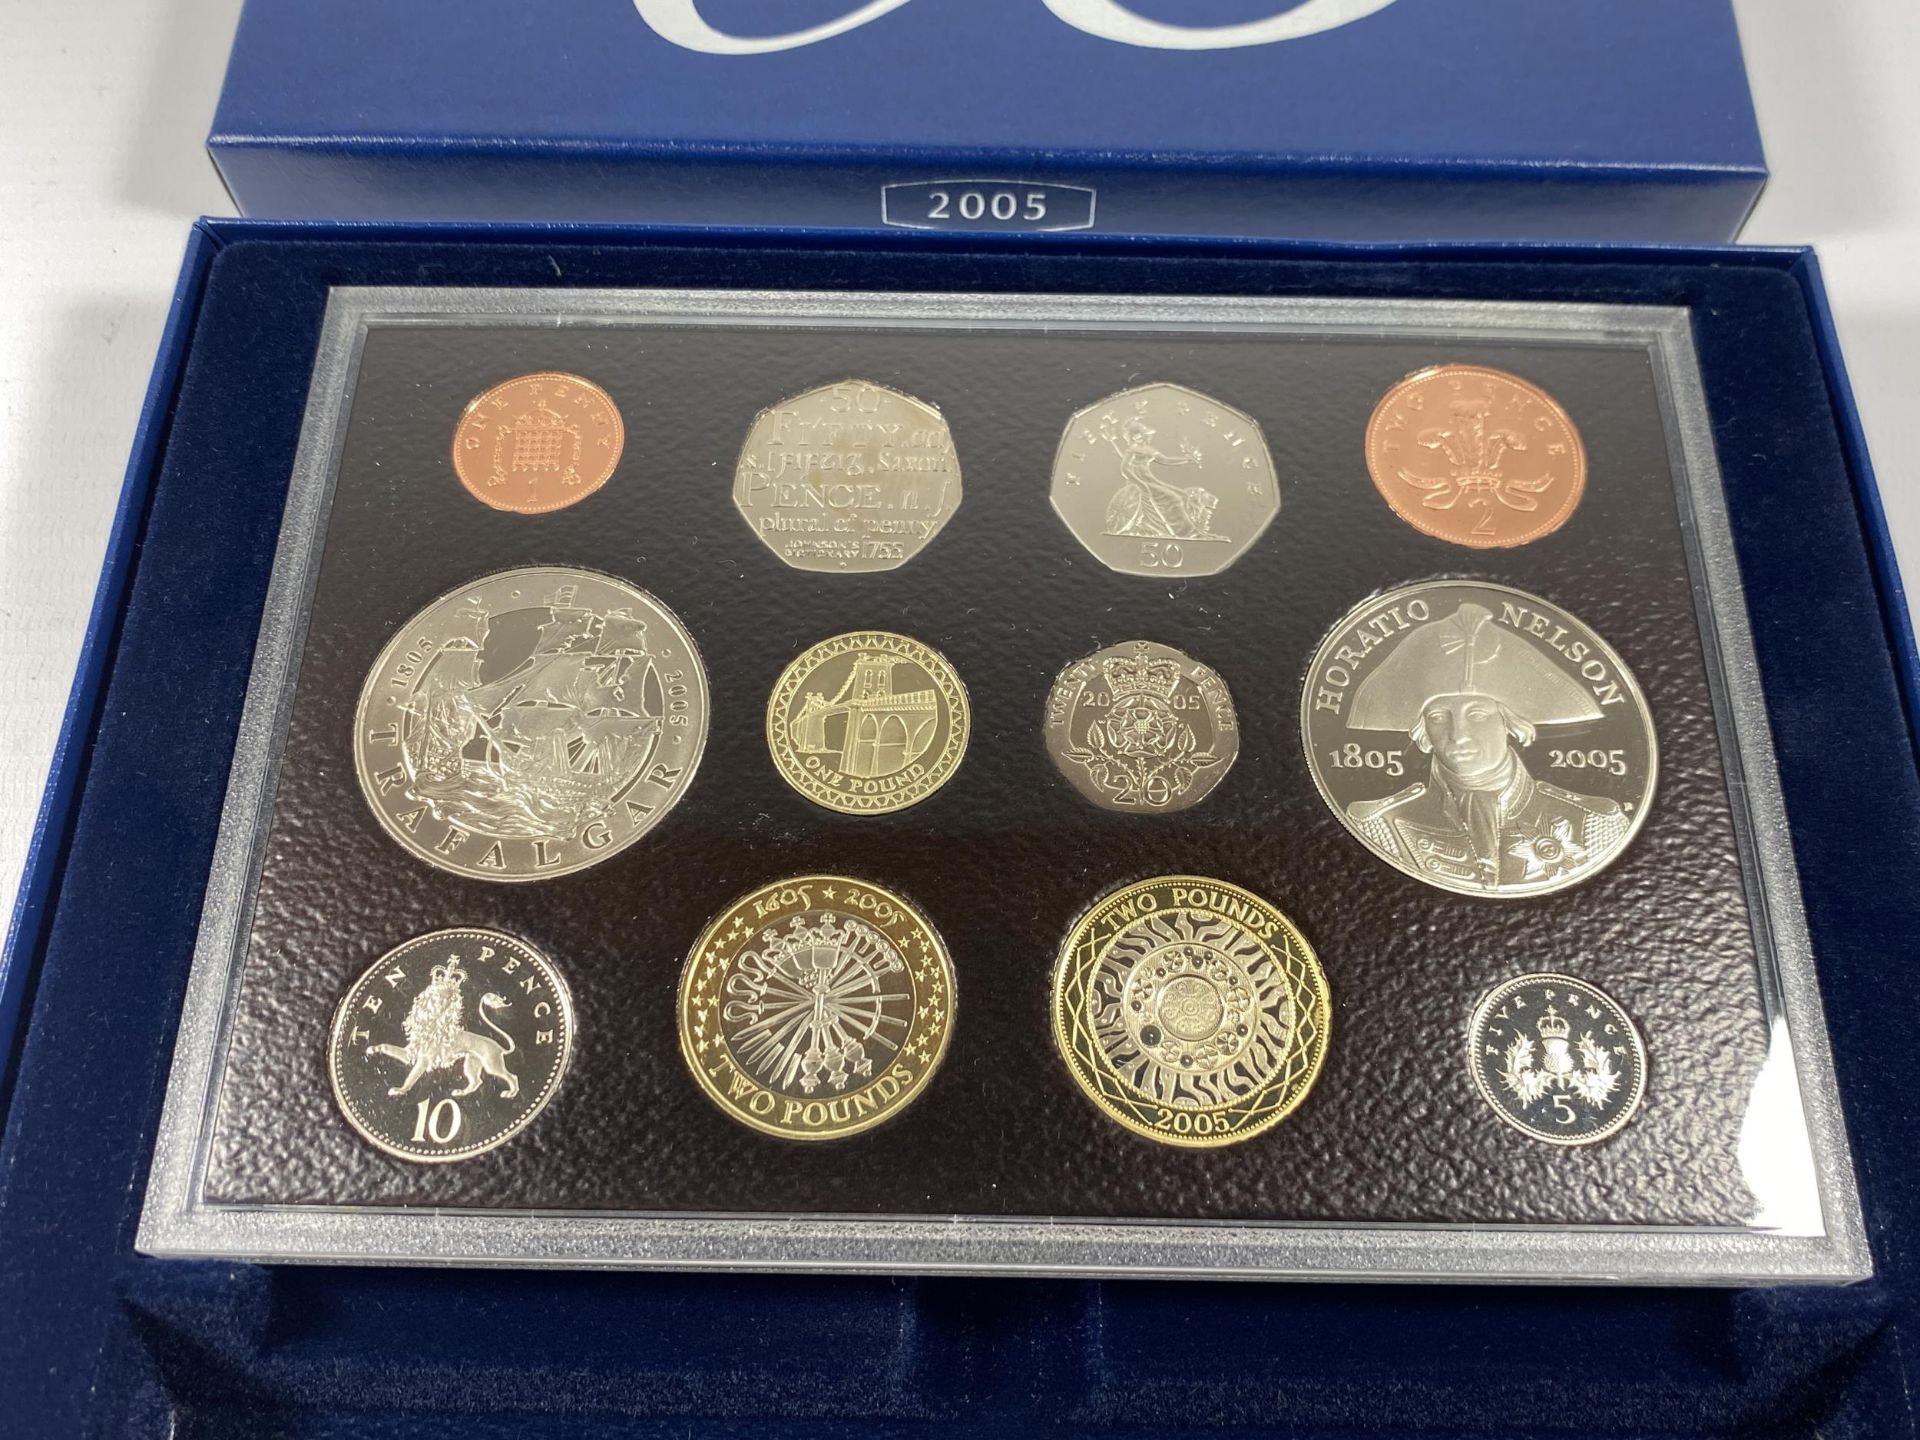 A 2005 ROYAL MINT CASED PROOF COIN SET - Image 2 of 2